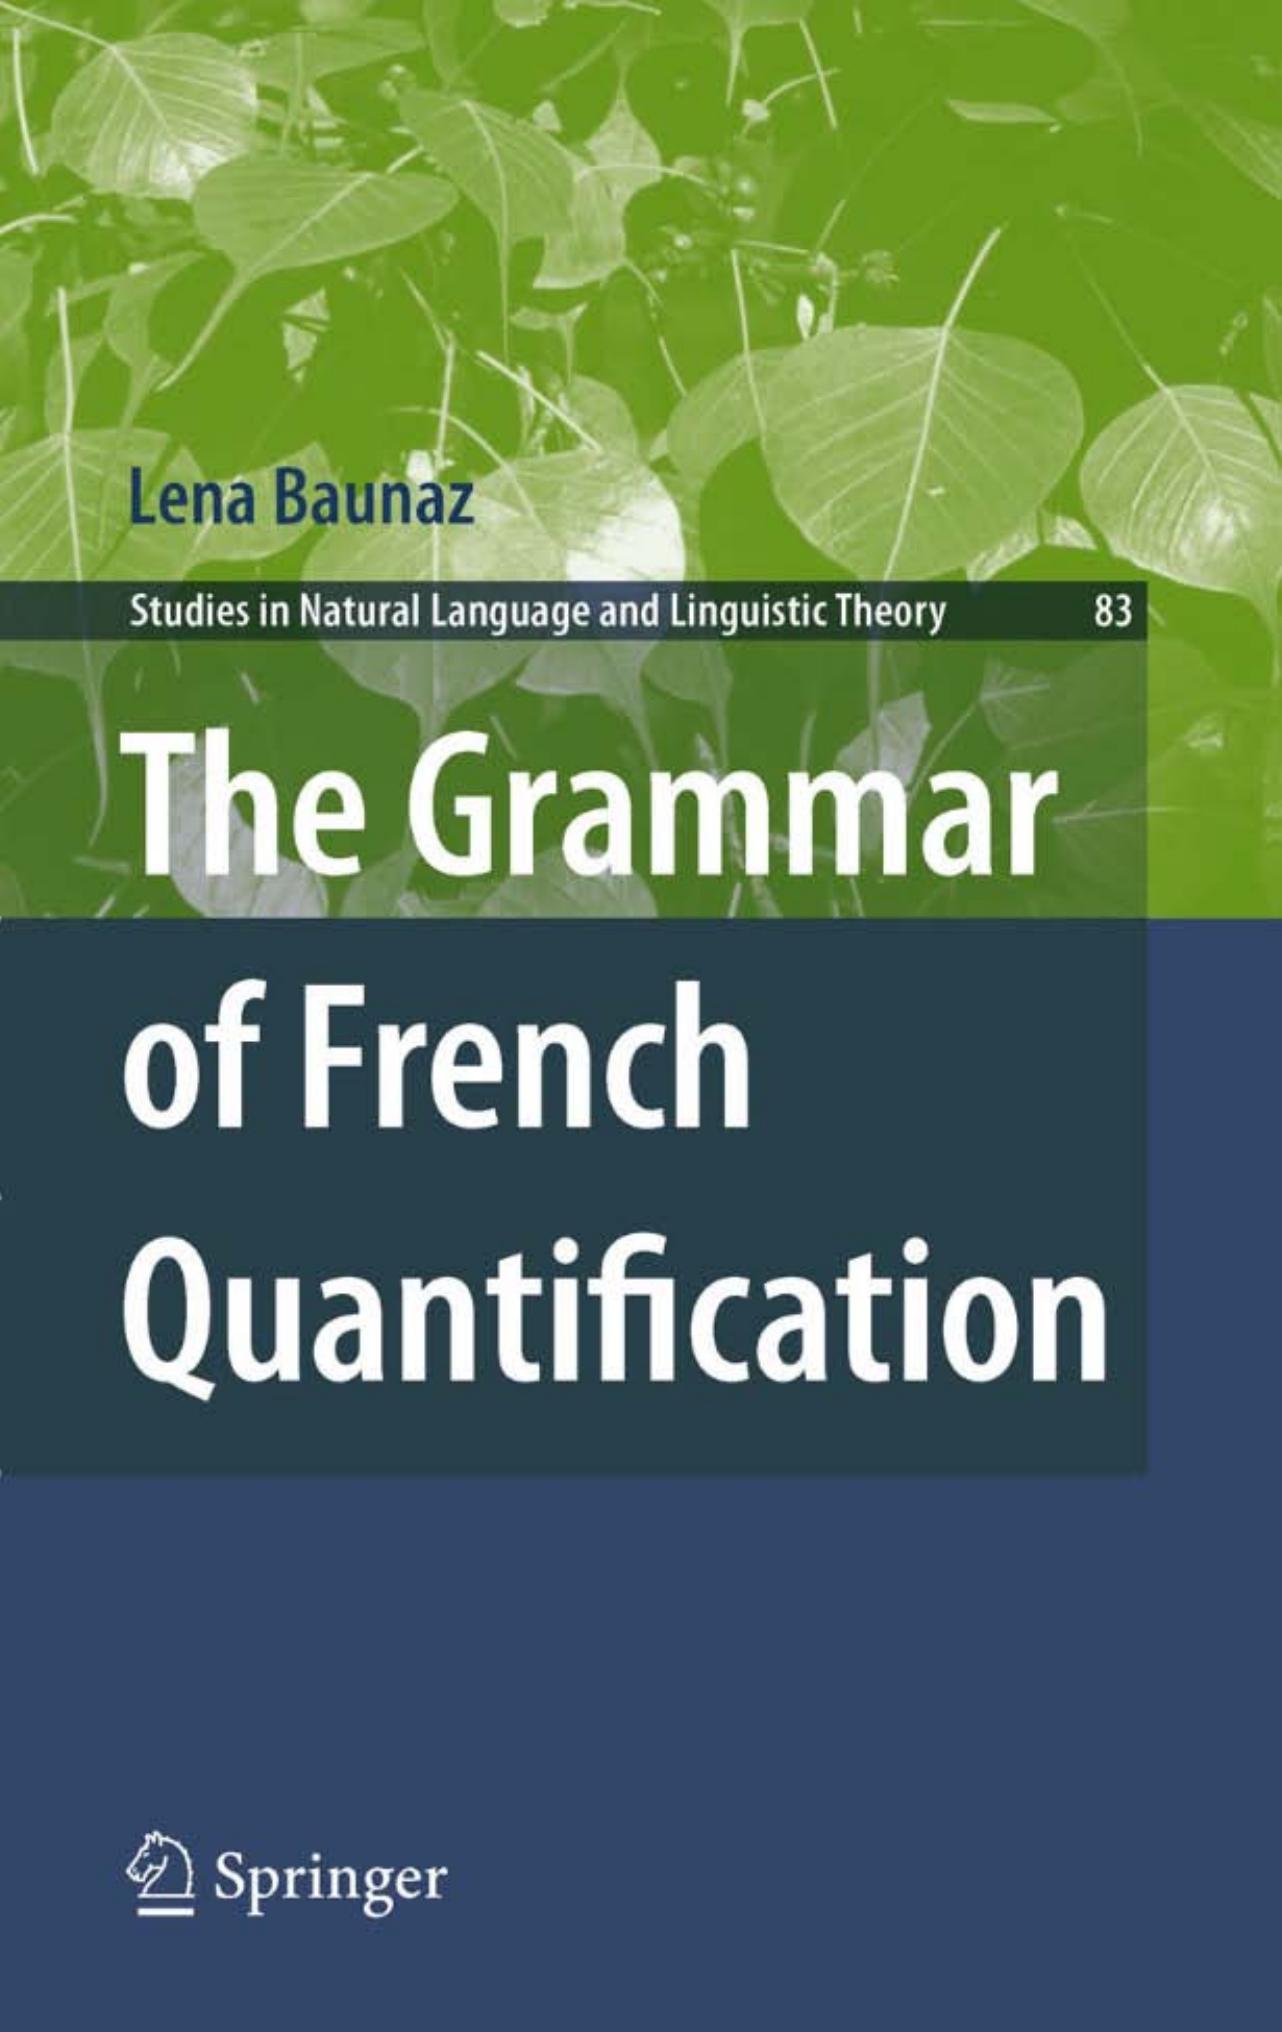 The Grammar of French Quantification (Studies in Natural Language and Linguistic Theory, 83)